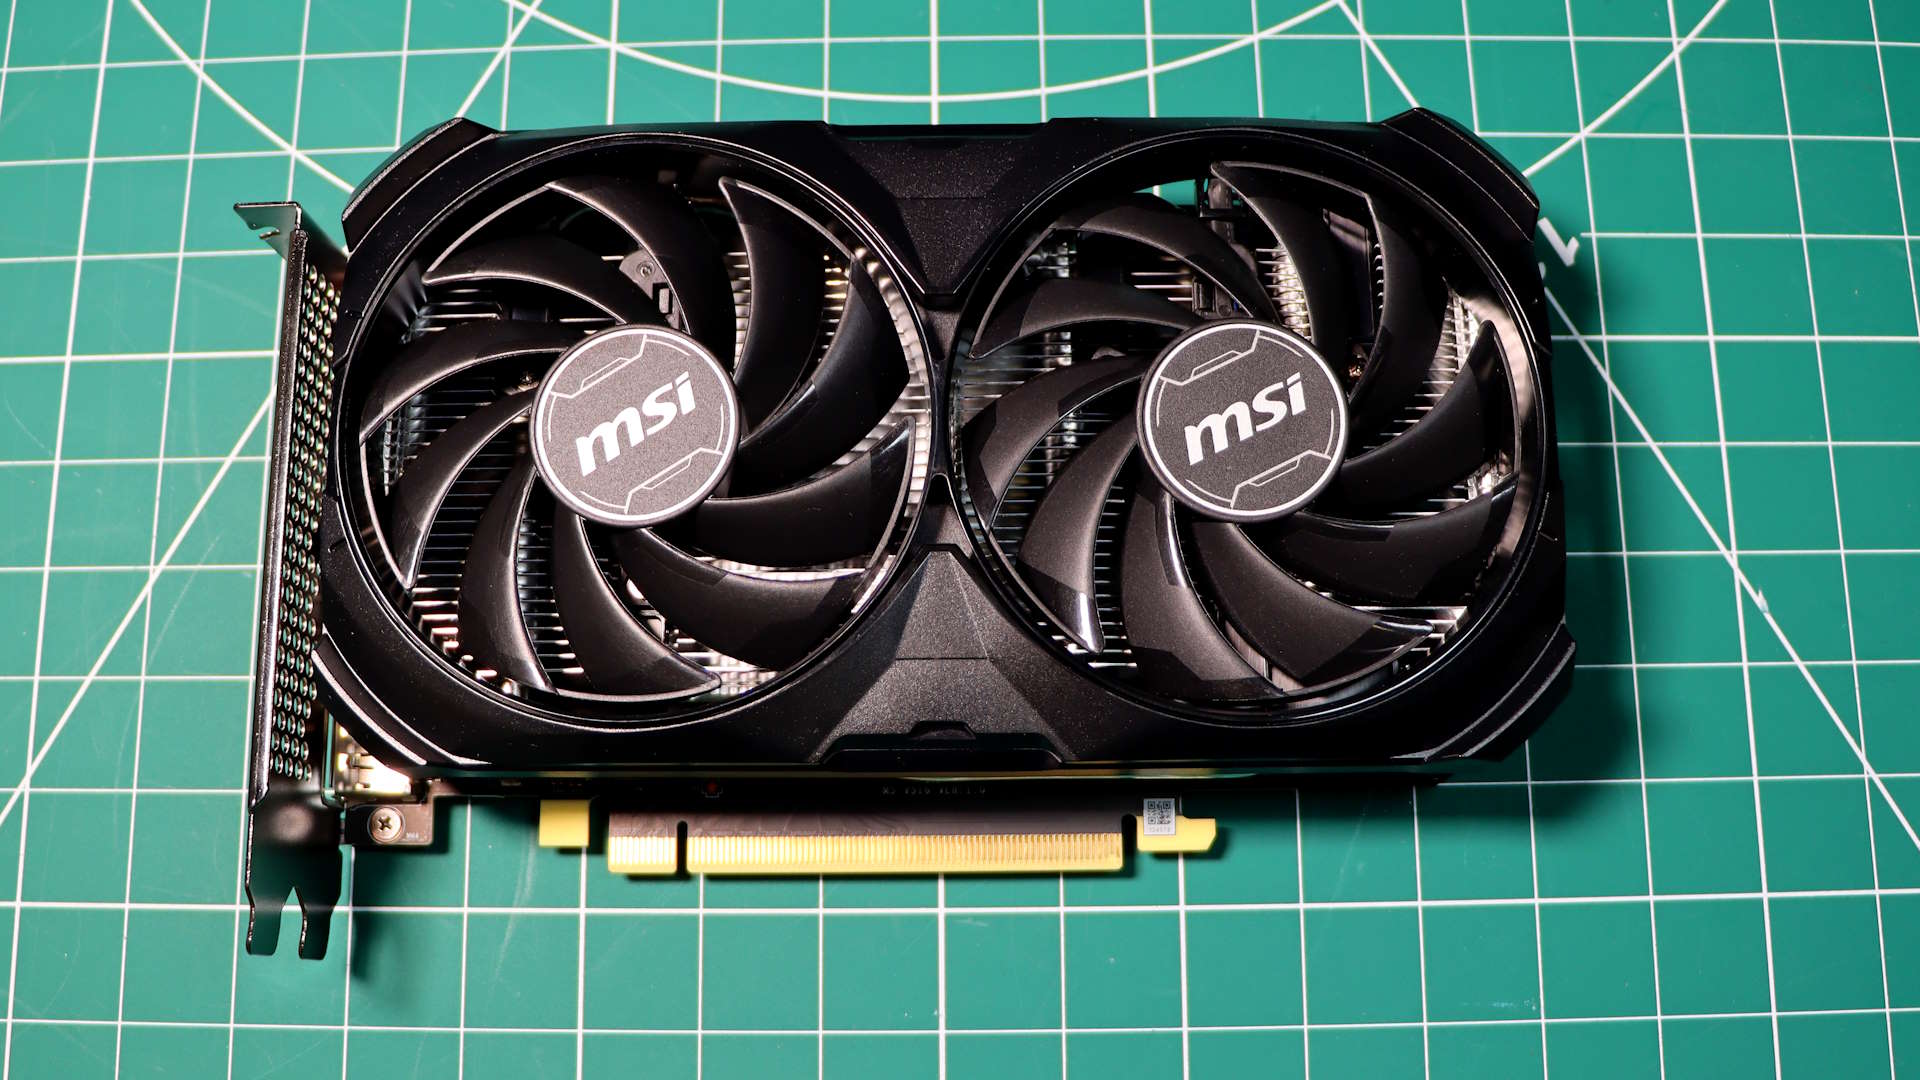 Nvidia GeForce RTX 4060 review